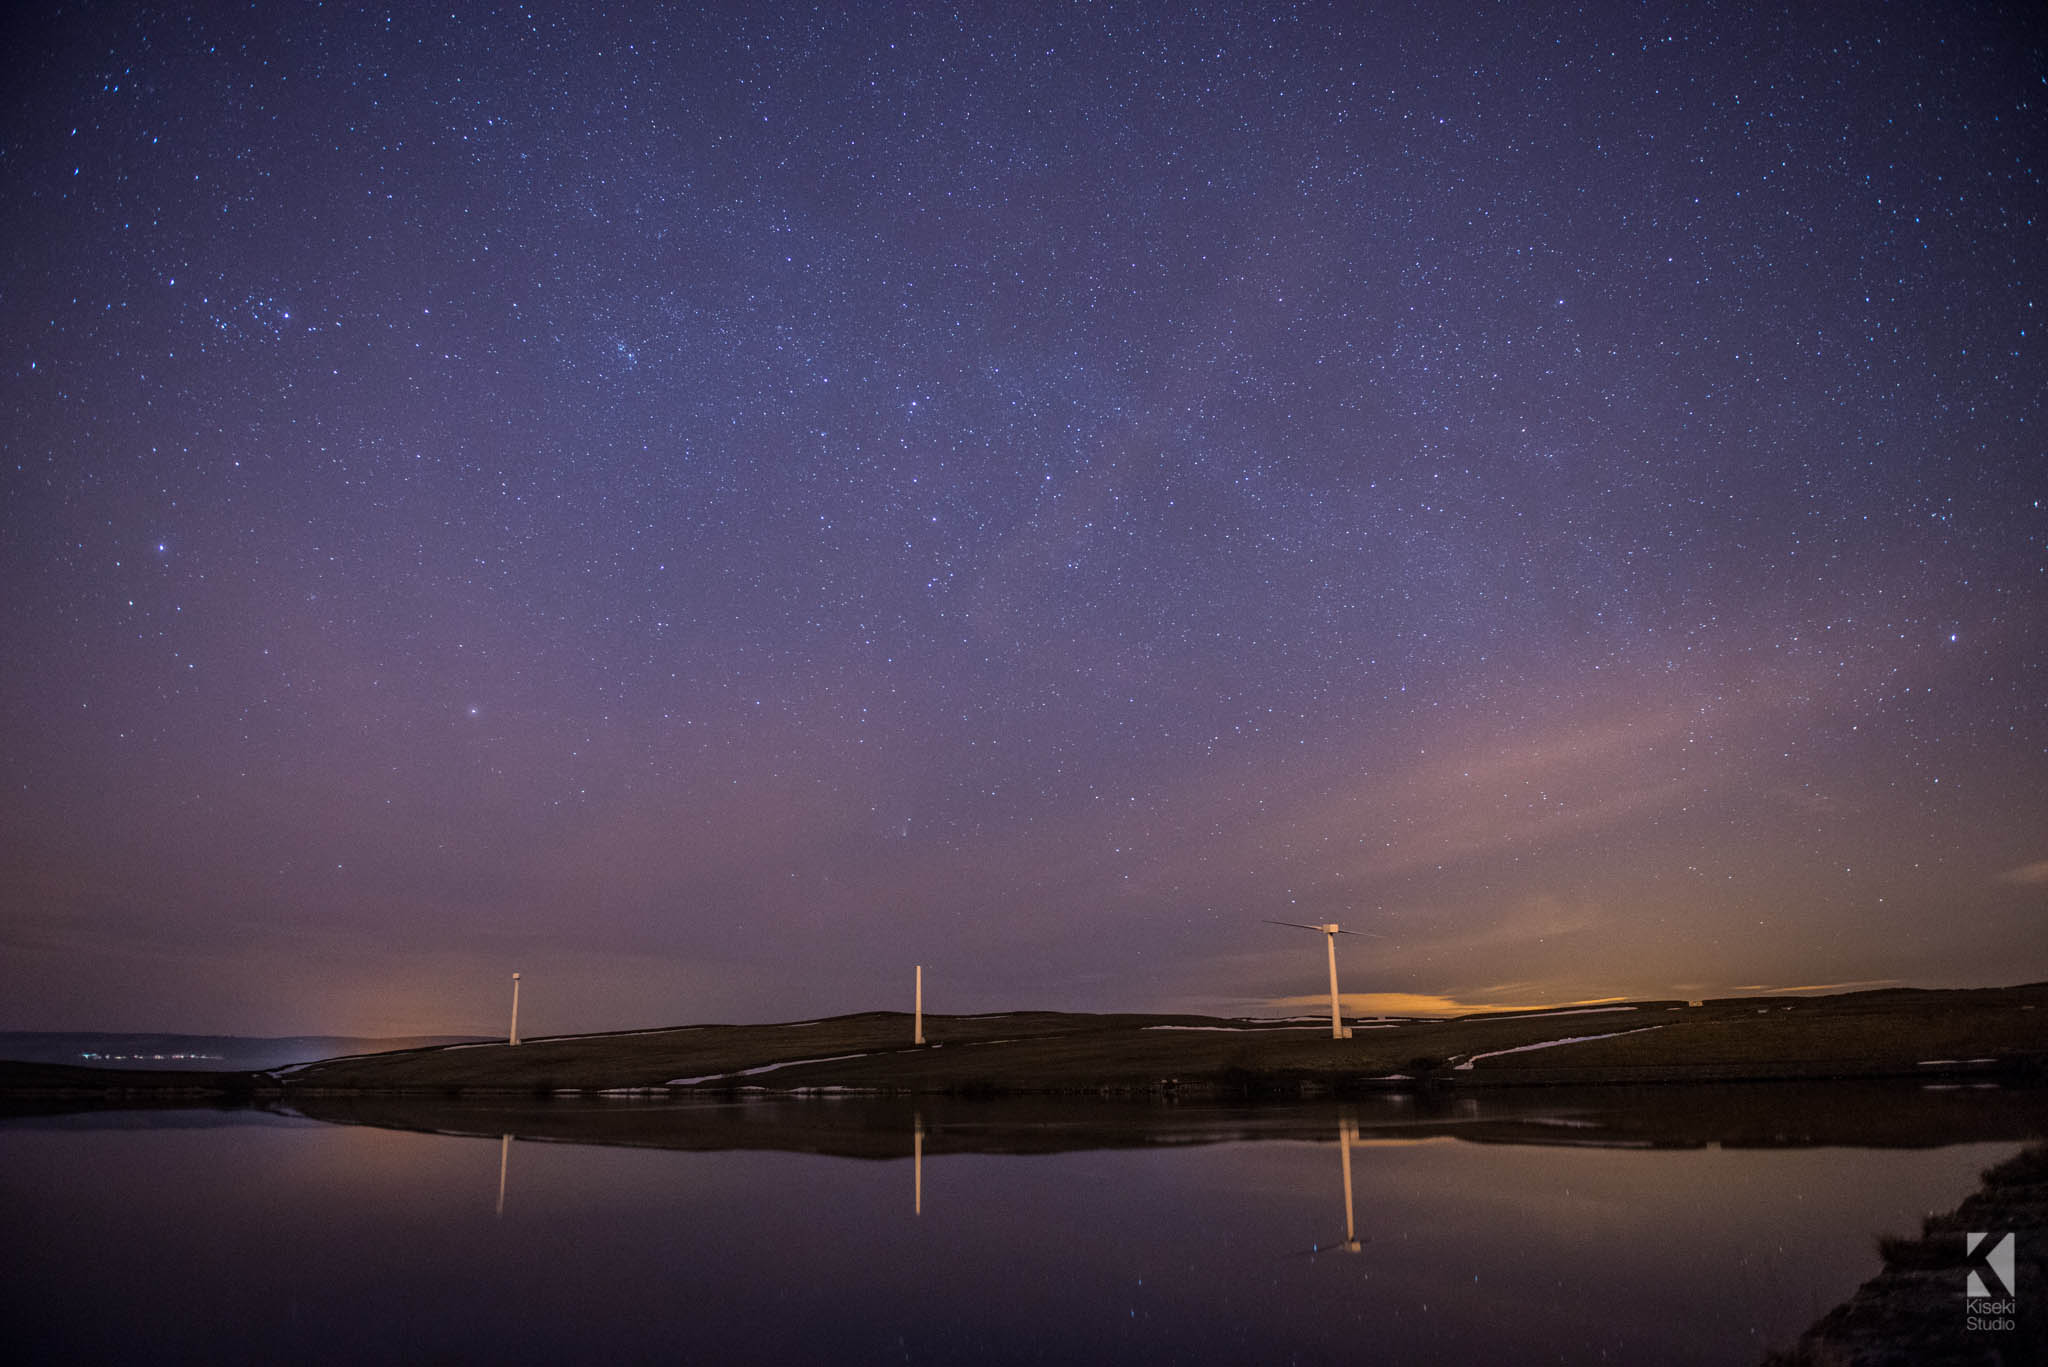 Chelker Reservoir at night with stars